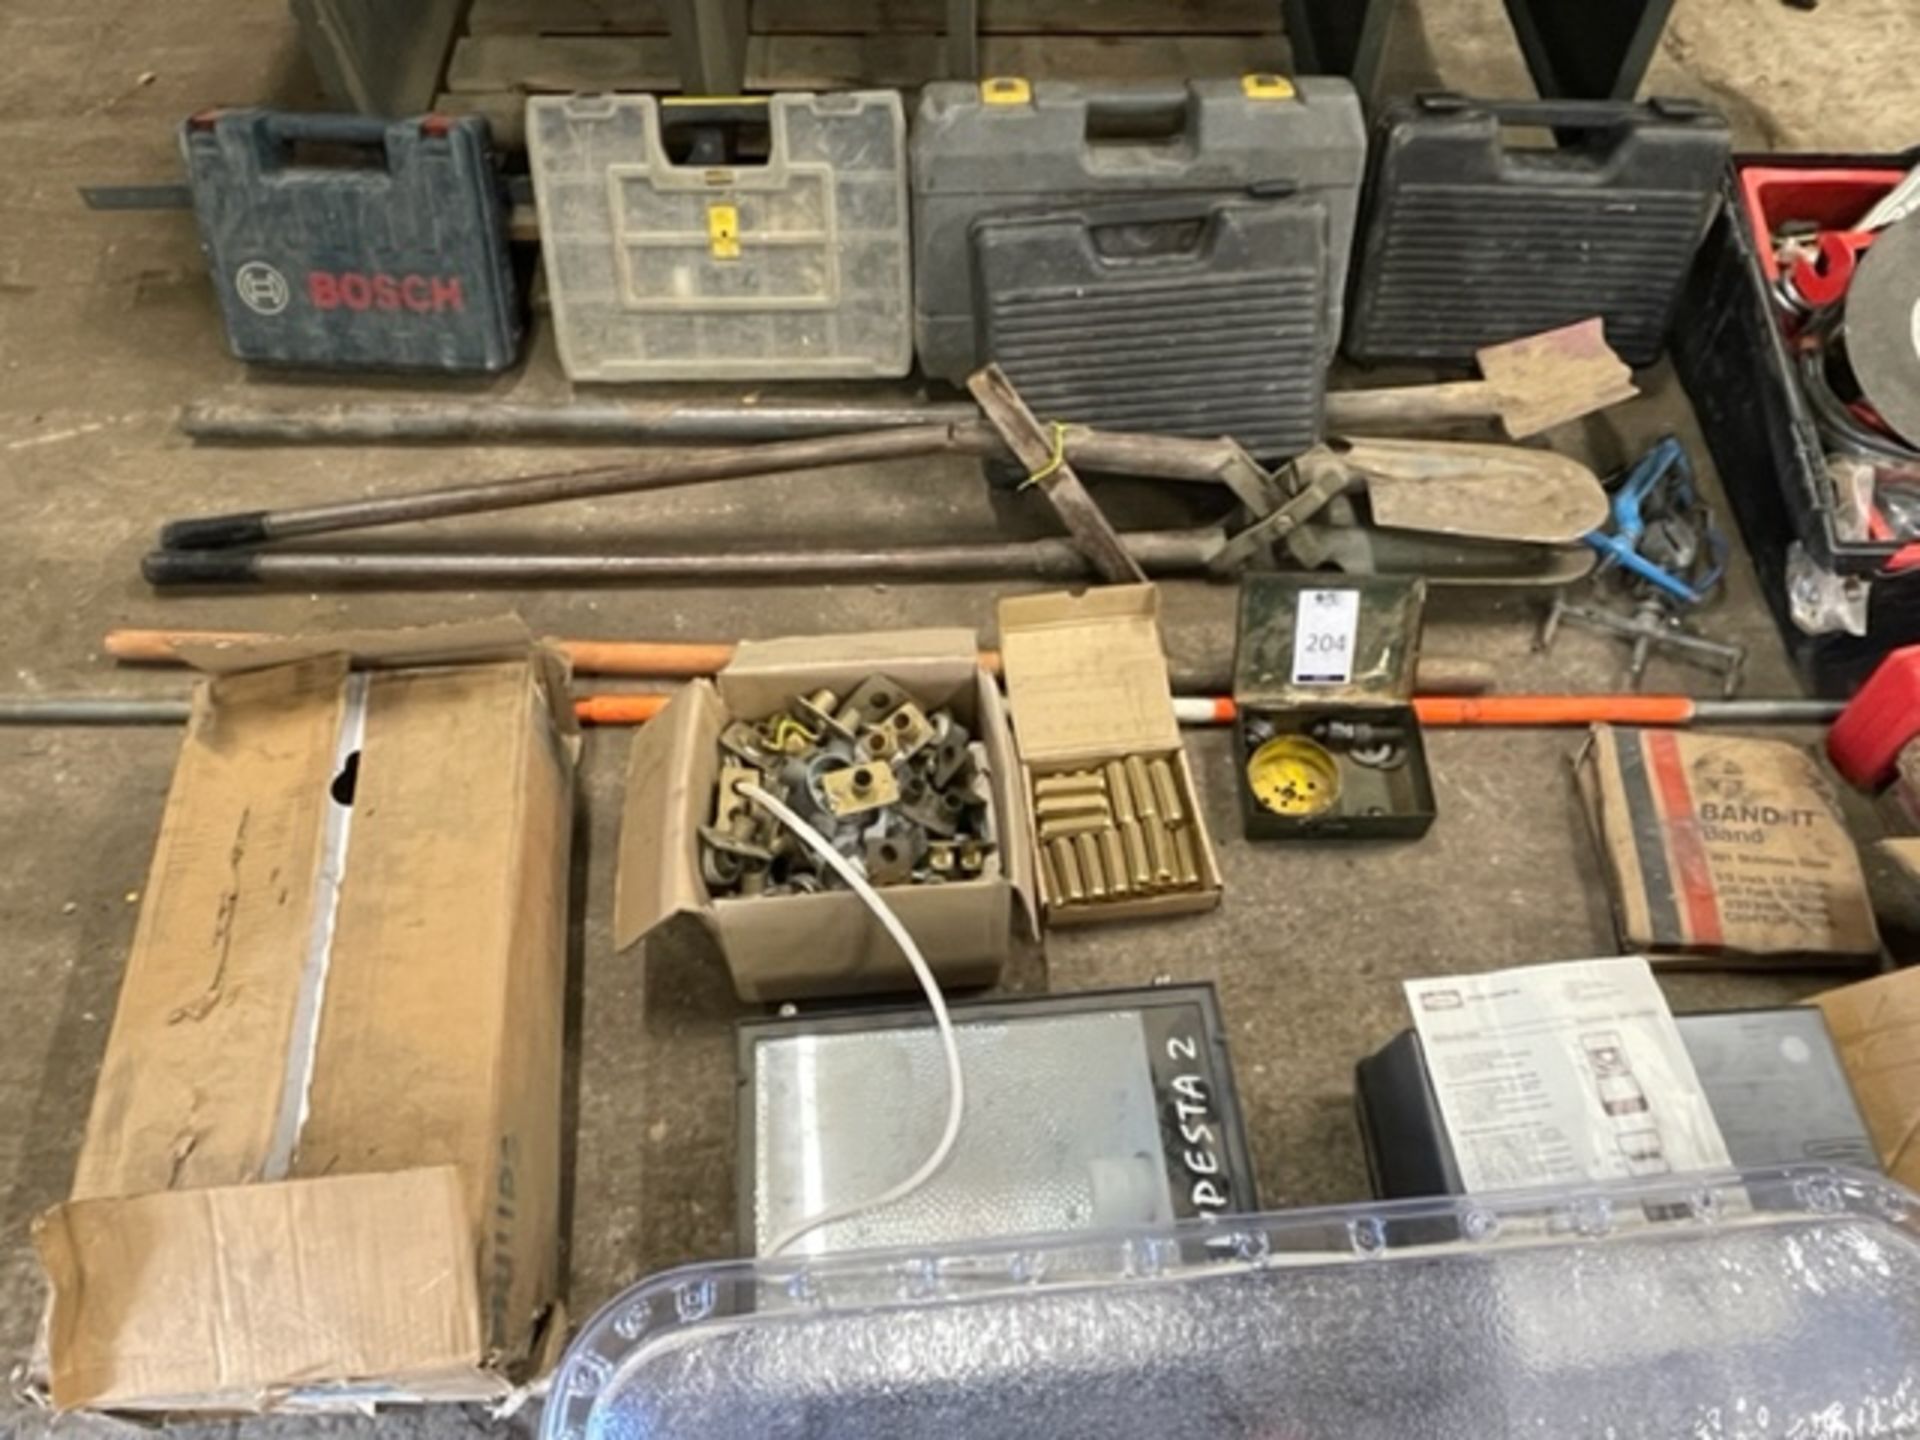 Miscellaneous Items Including Two FL500 Lights, Floodlights, Hand Tools, 4 Slotted Steel Racks, Tool - Image 2 of 7